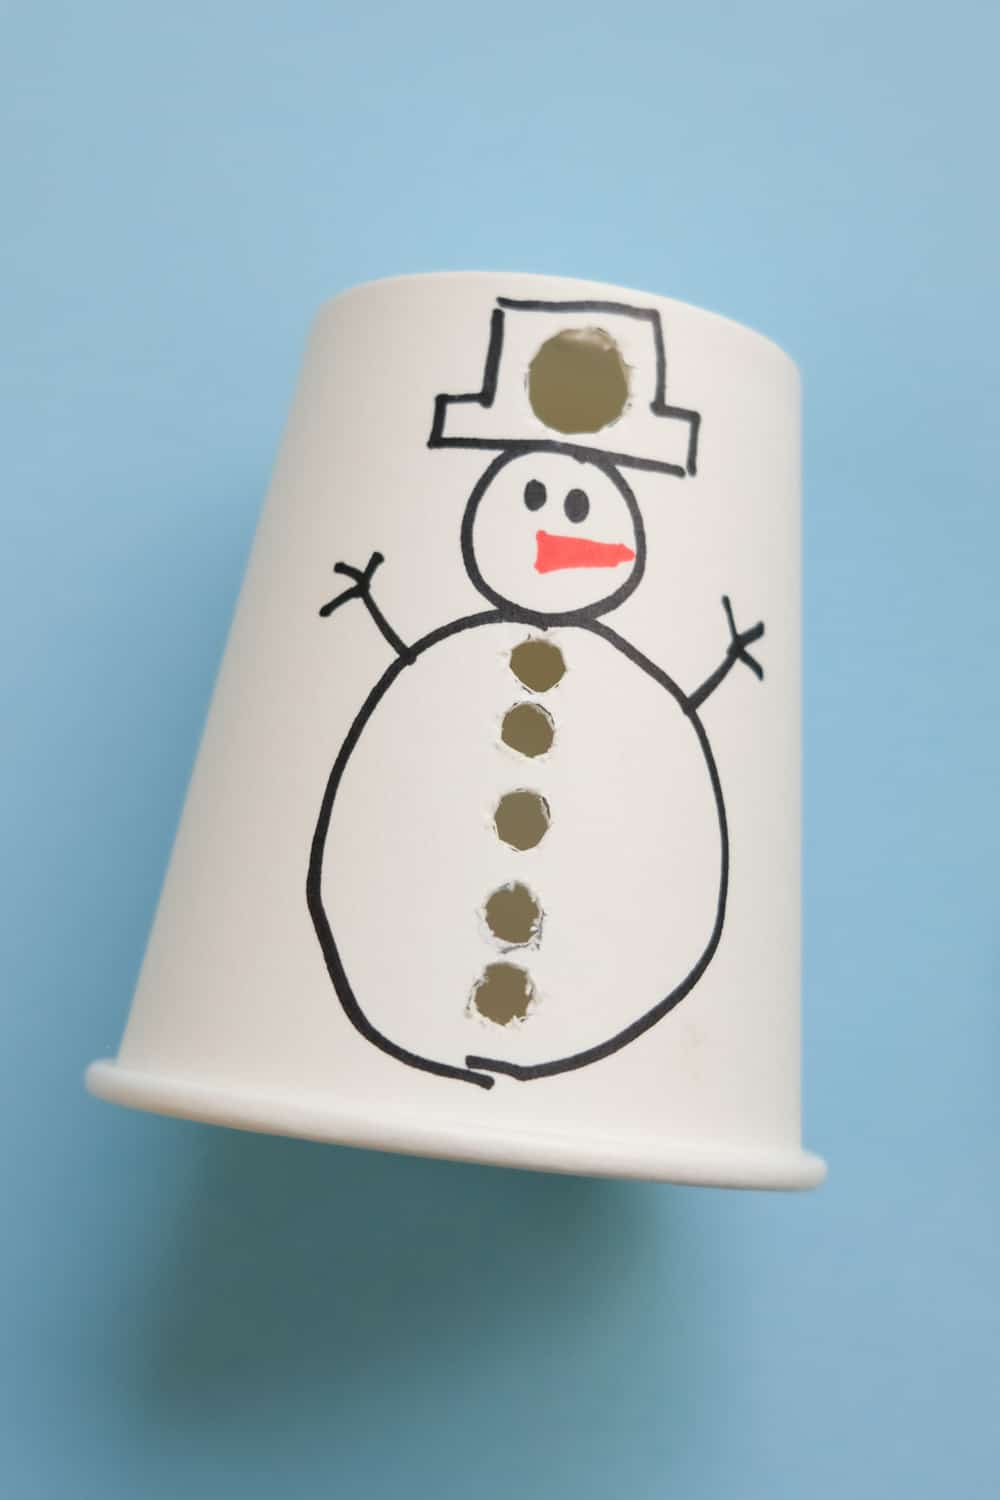 Toddlers are going to have so much fun learning how to count from 1 to 5 with this DIY paper cup snowman! 